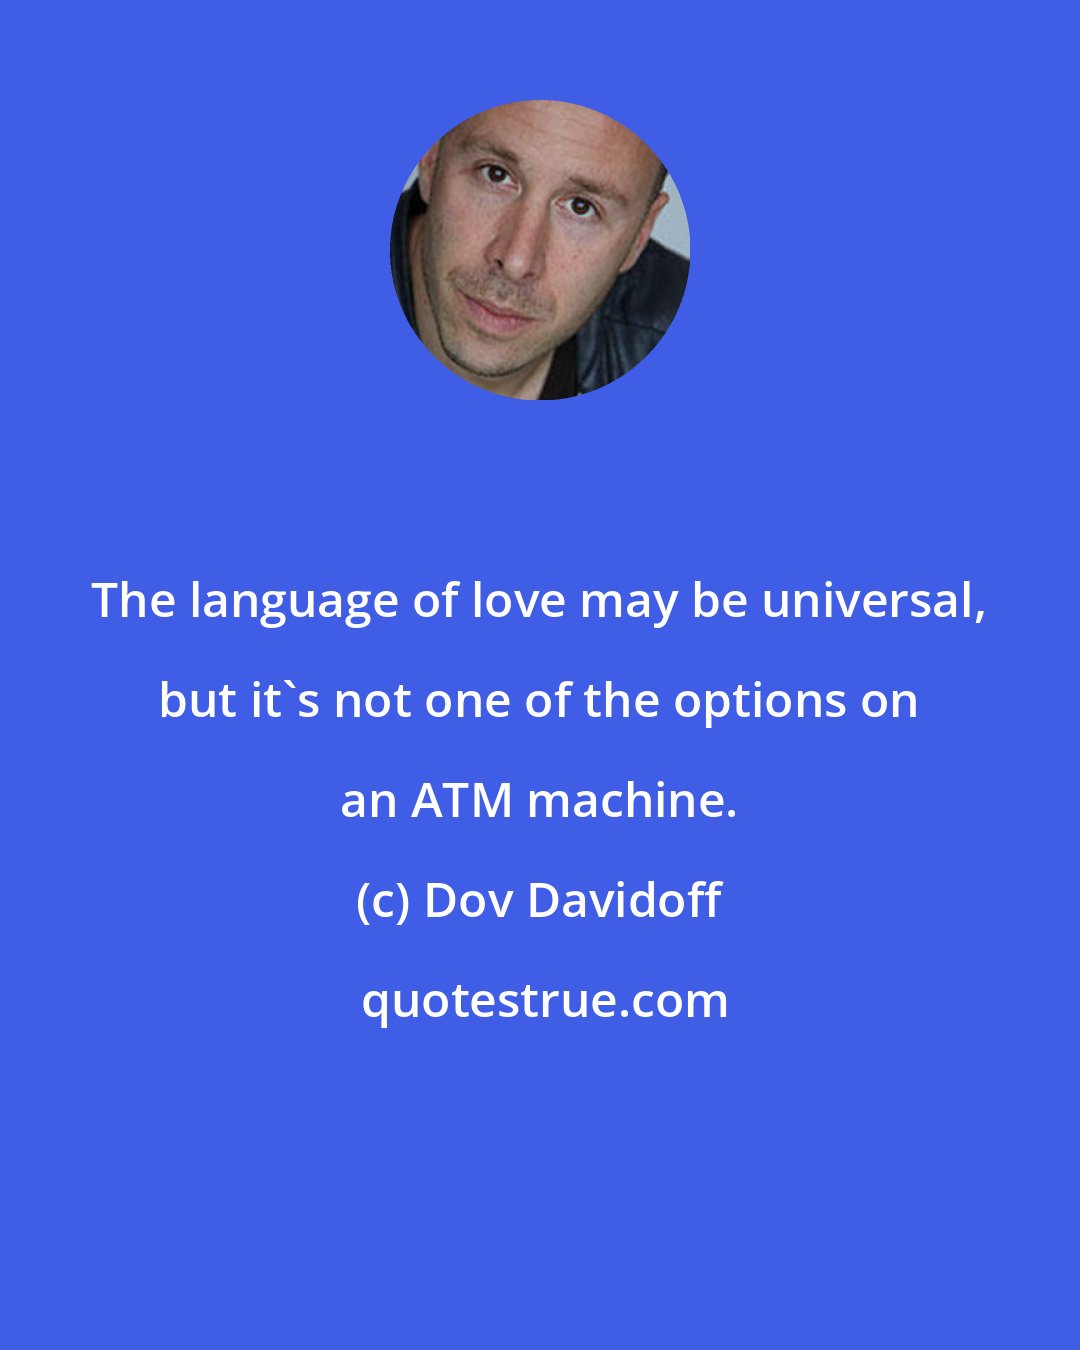 Dov Davidoff: The language of love may be universal, but it's not one of the options on an ATM machine.